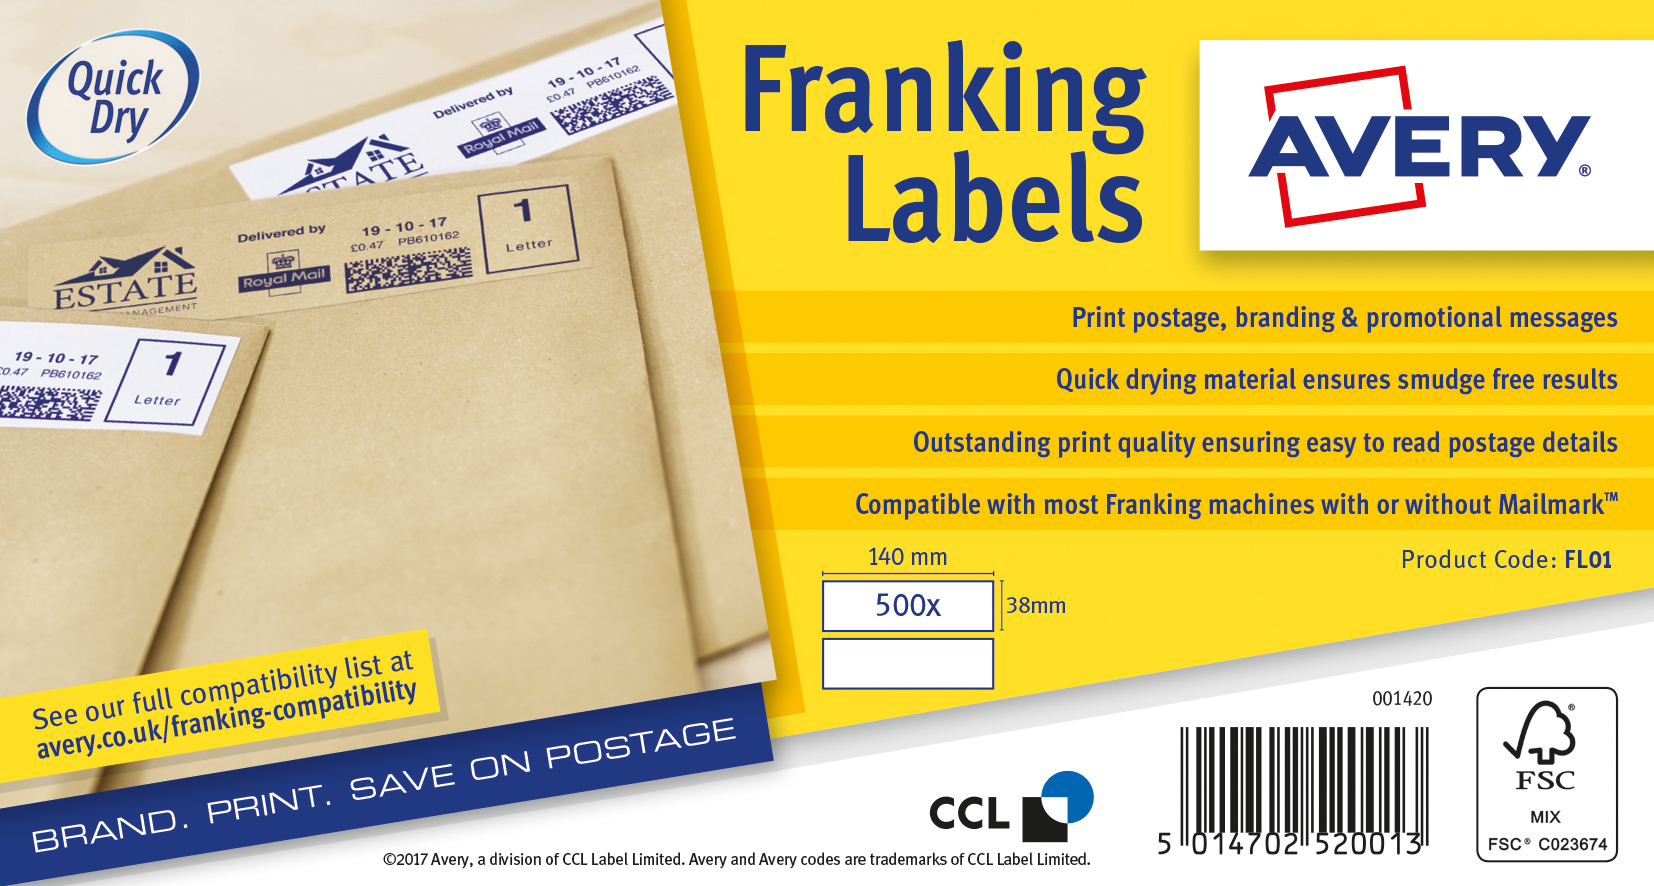 Avery Franking Label Manual Feed 140x38mm (Pack 1000 Labels) FL01